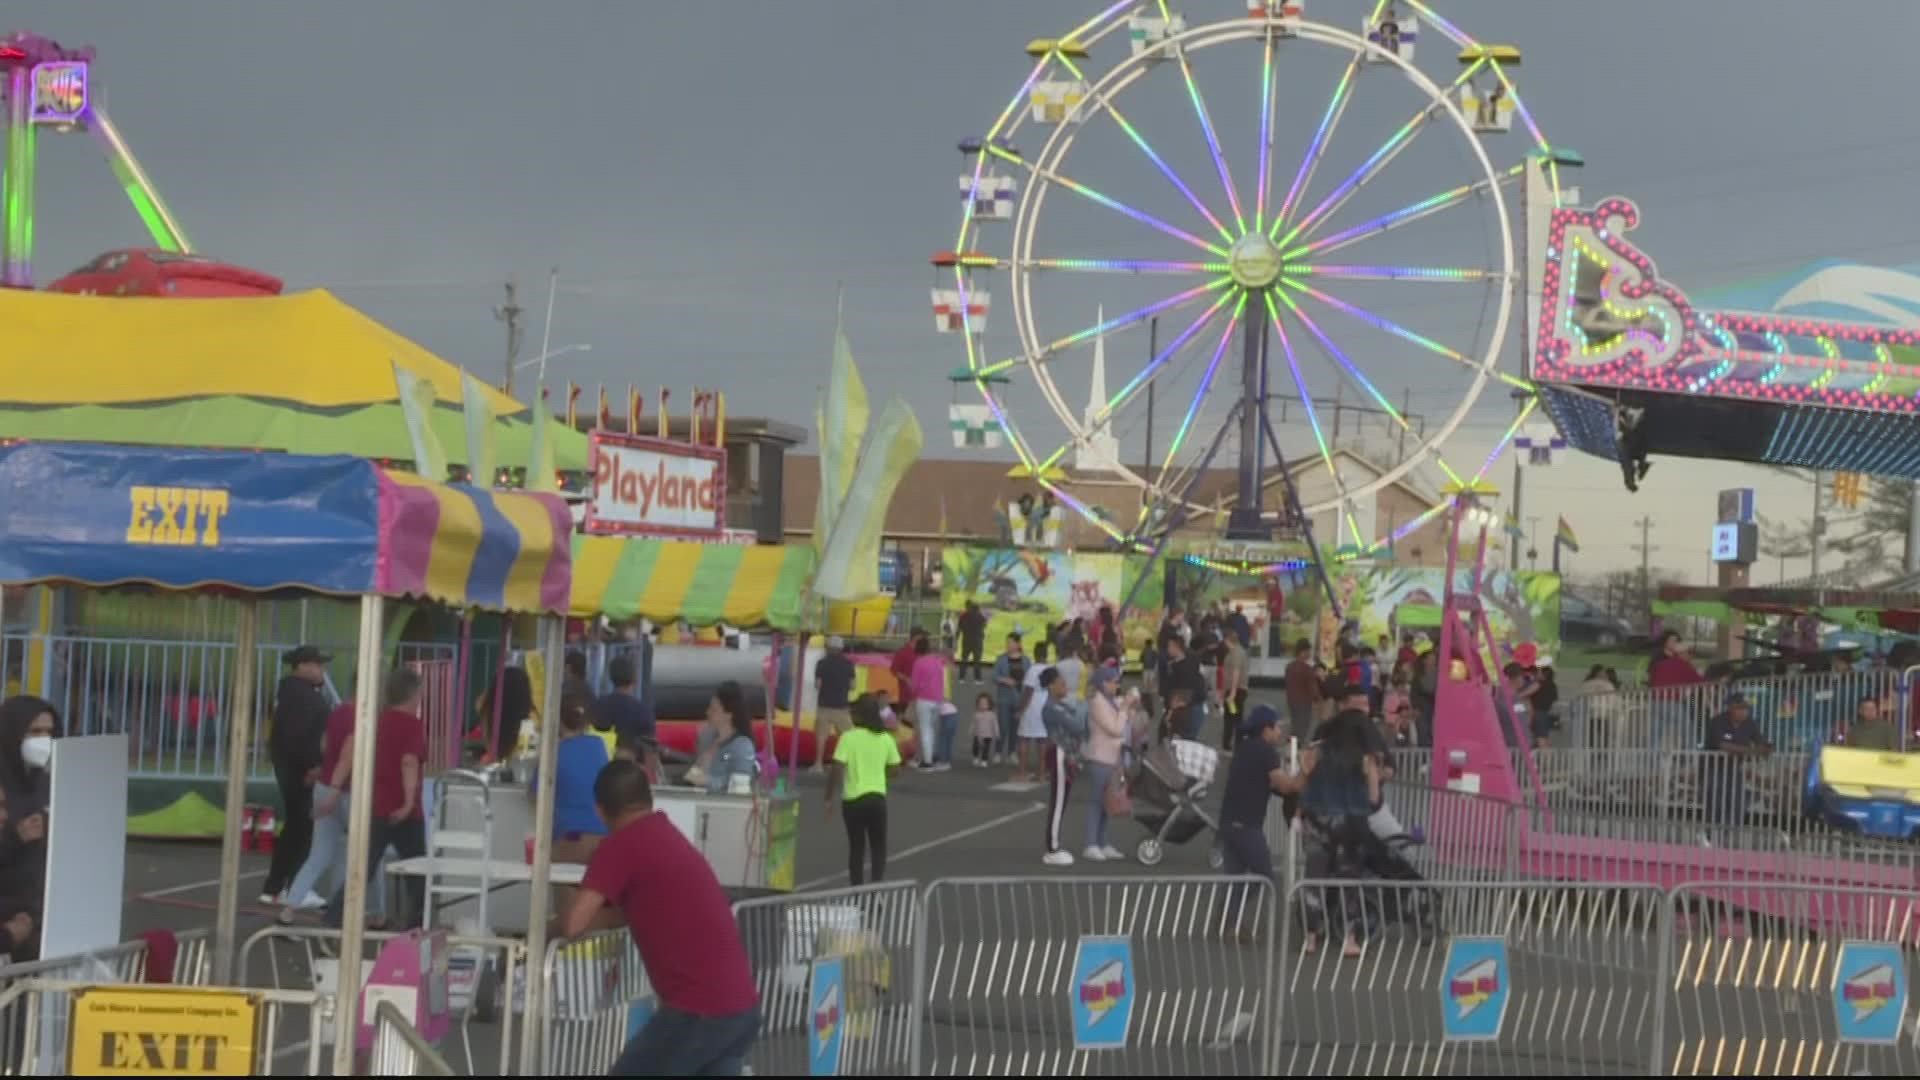 Austin Green told WUSA9 that he and others at first thought the popping sounds came from fireworks or car exhaust. The Kiwanis Karnival reopened Saturday.